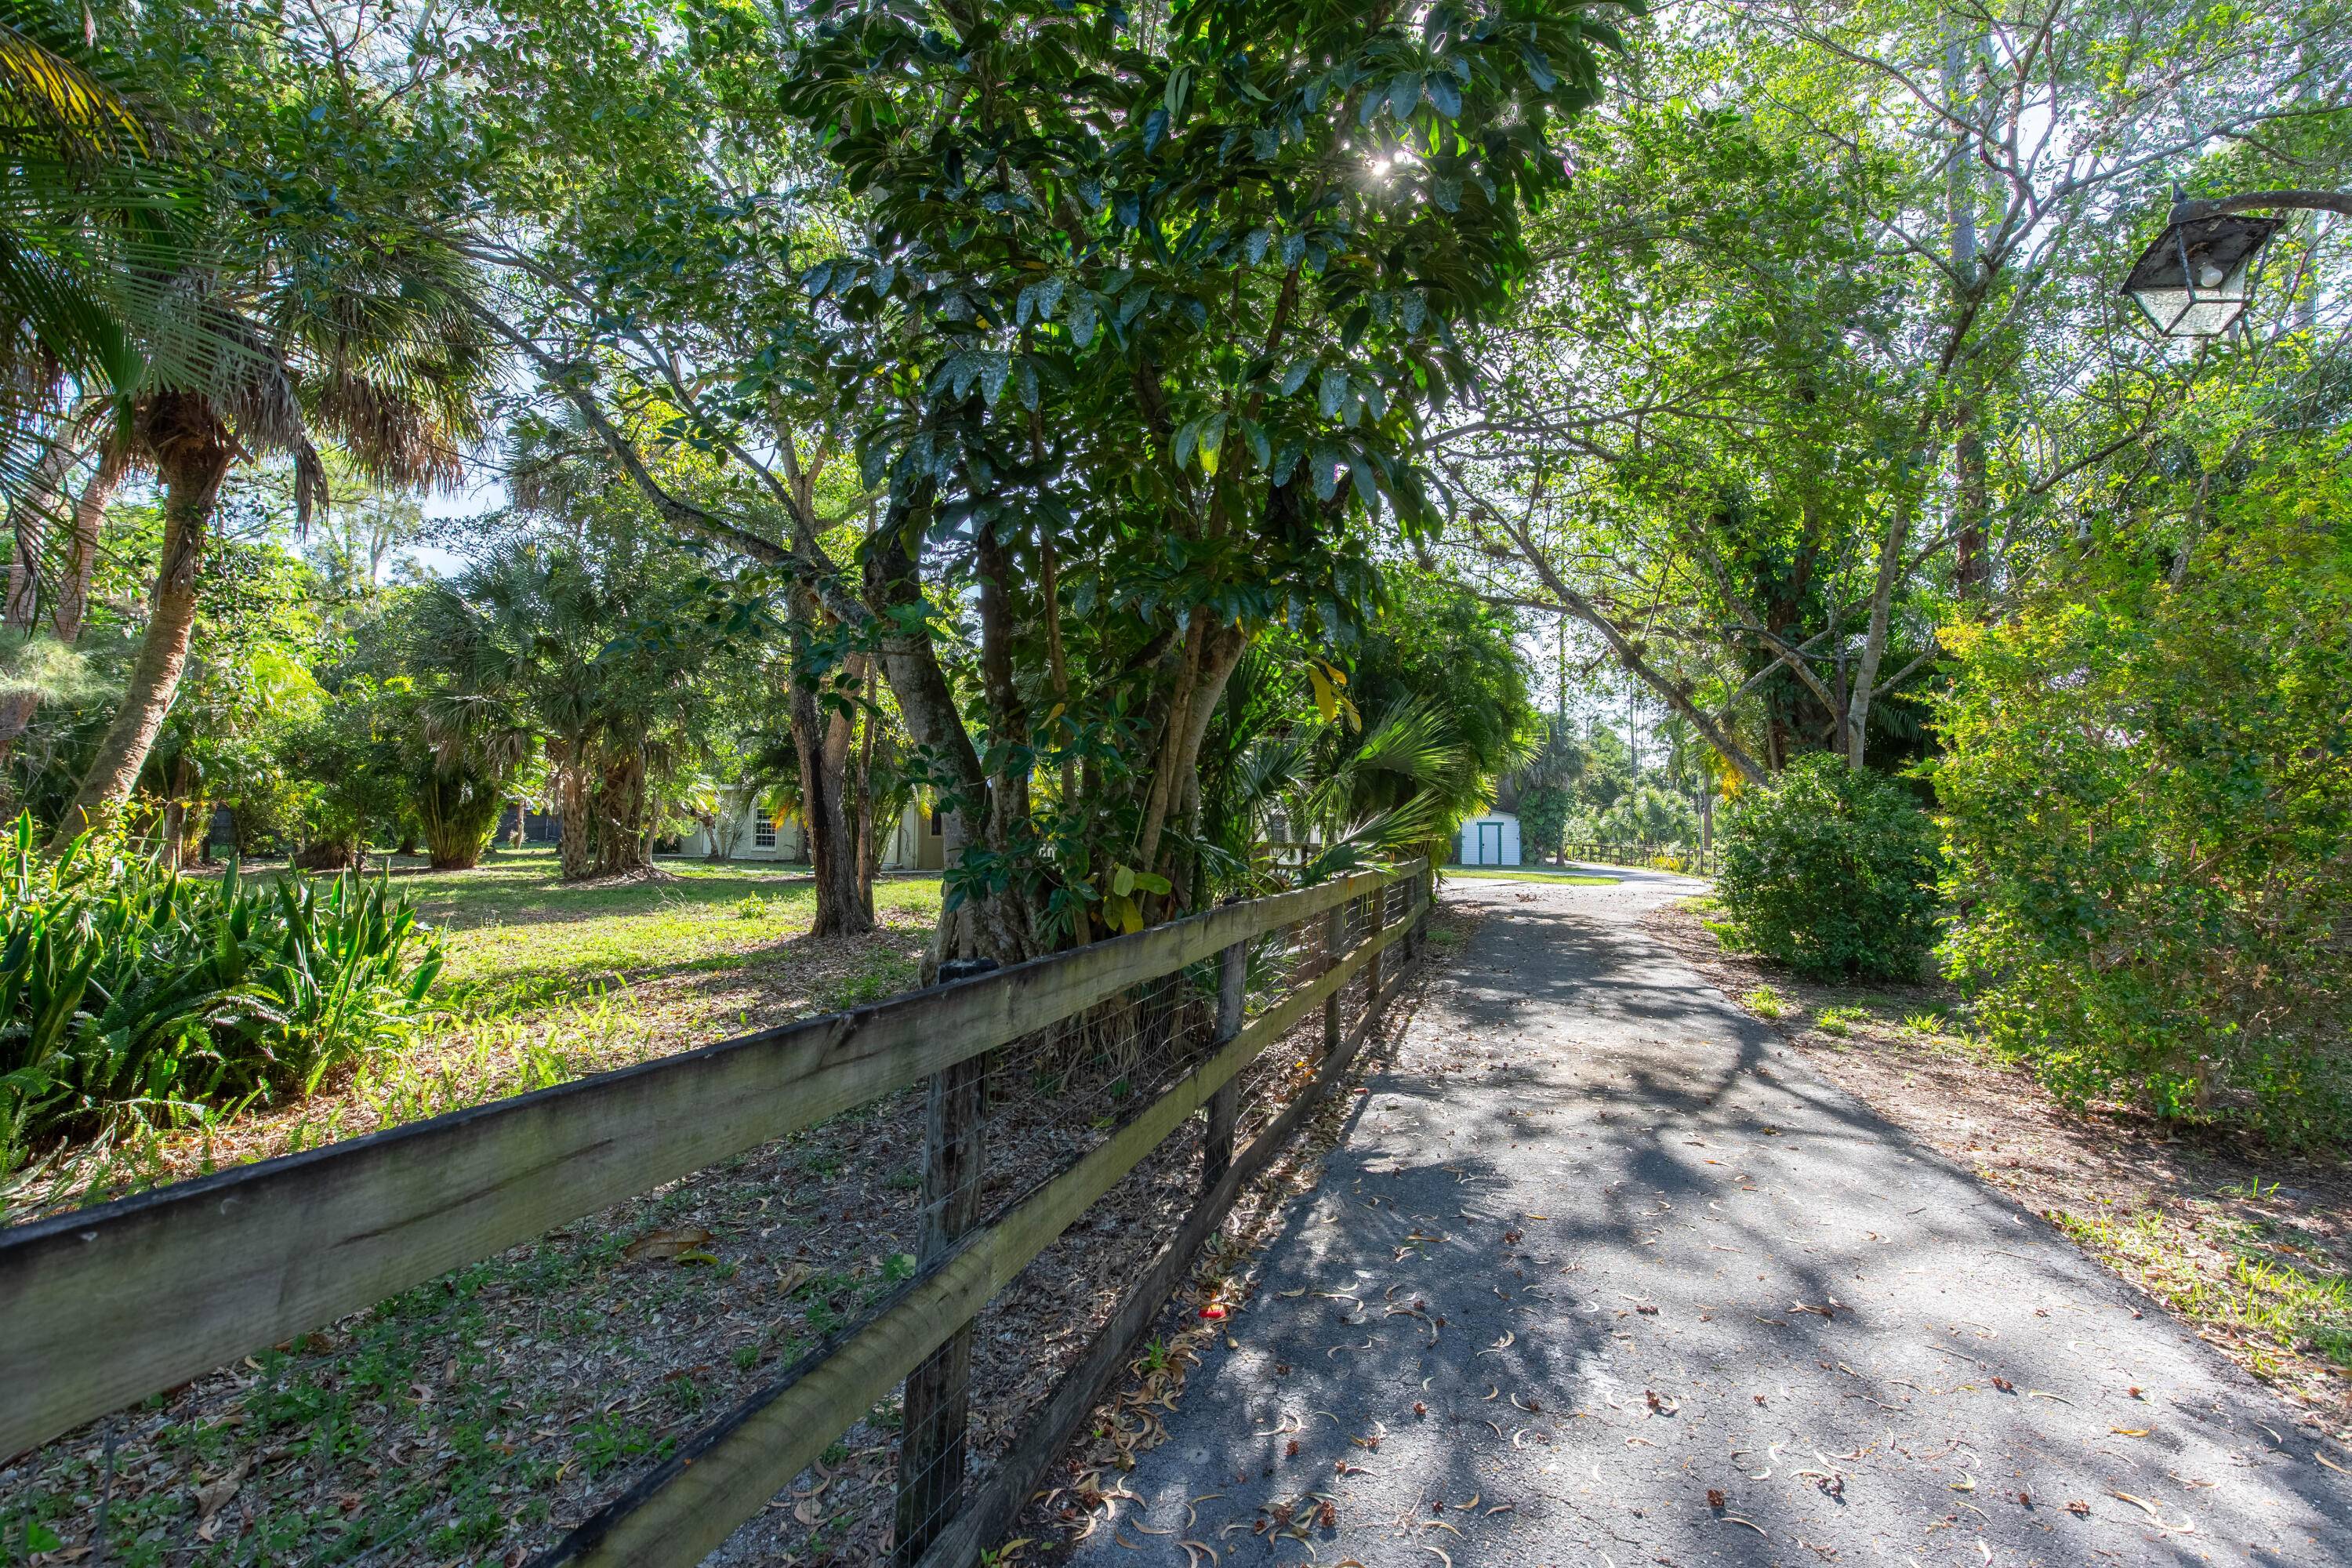 Handyman special situated on fantastic lot in sought after Palm Beach Little Ranches.